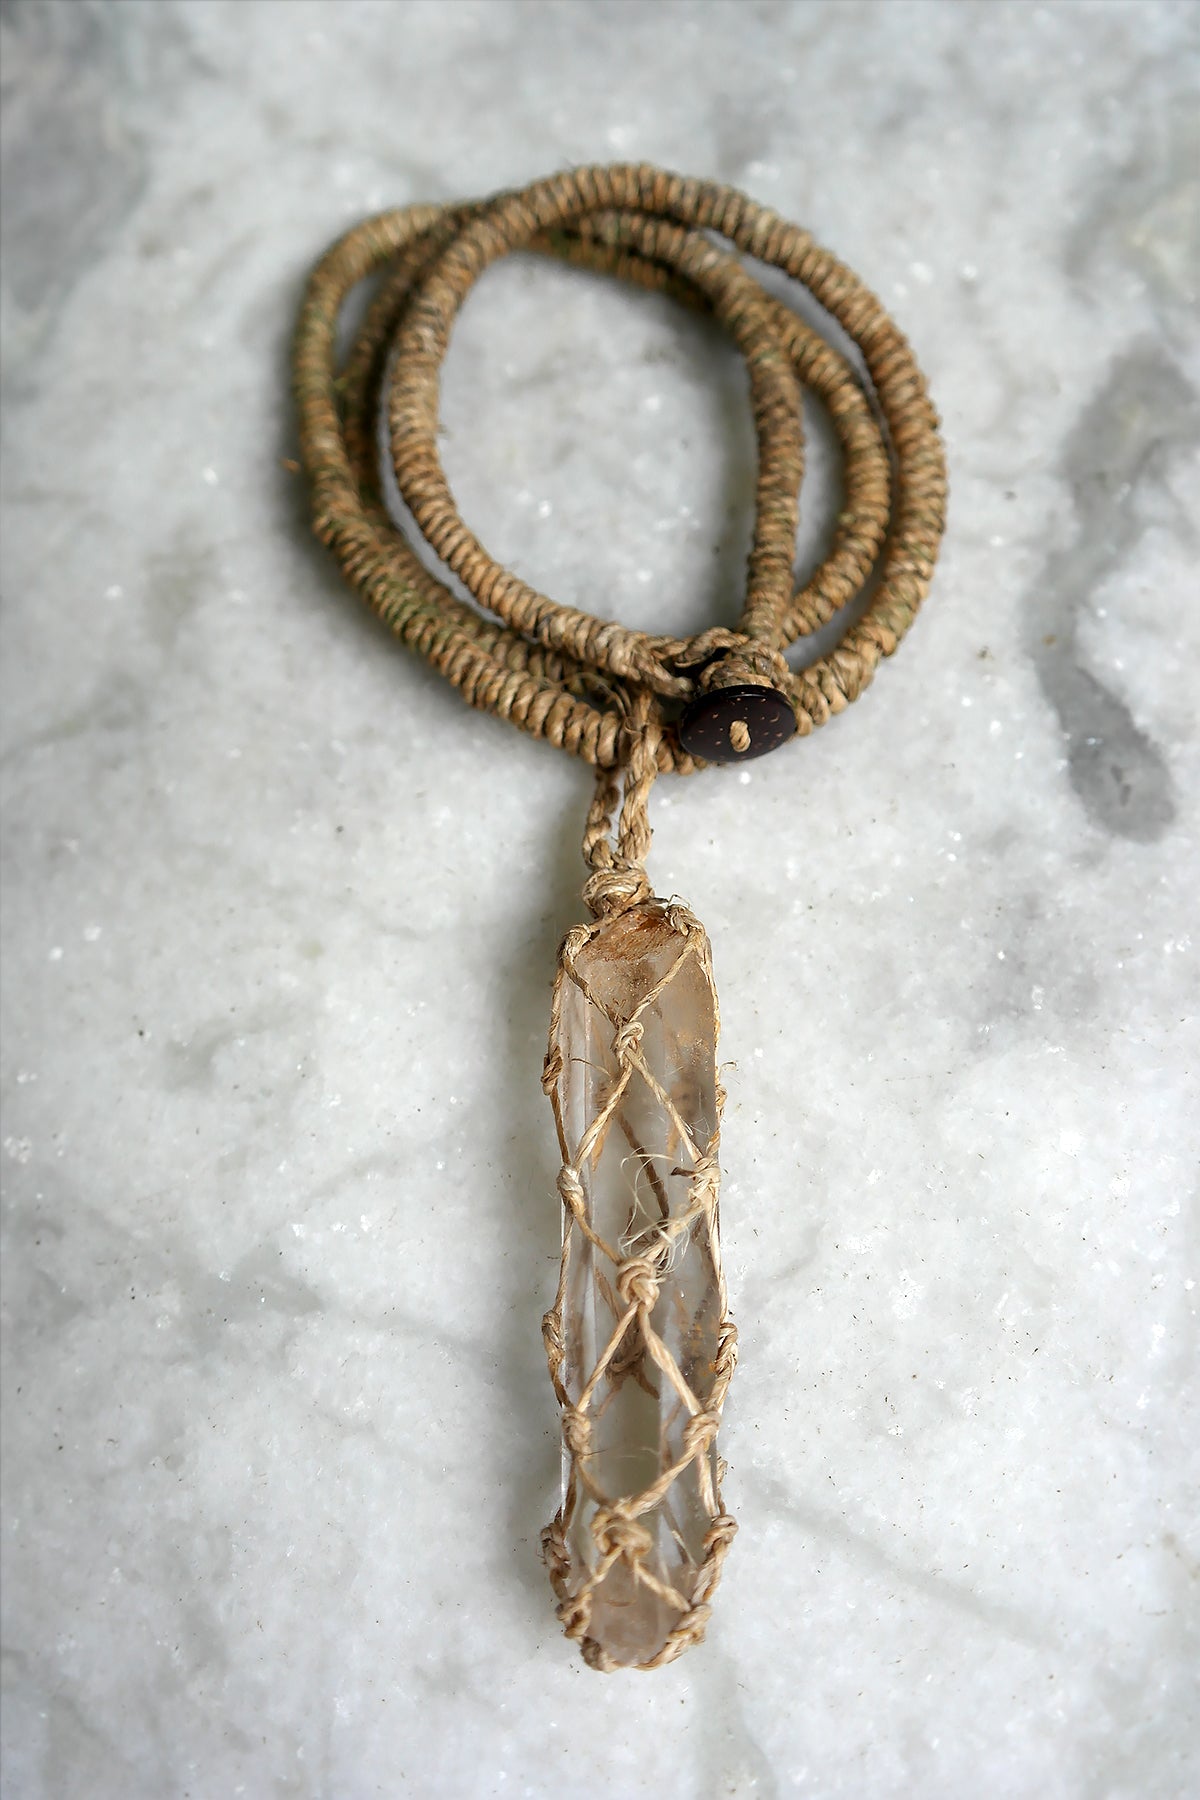 Crystal Stone Pendant Necklace with Hemp Cord